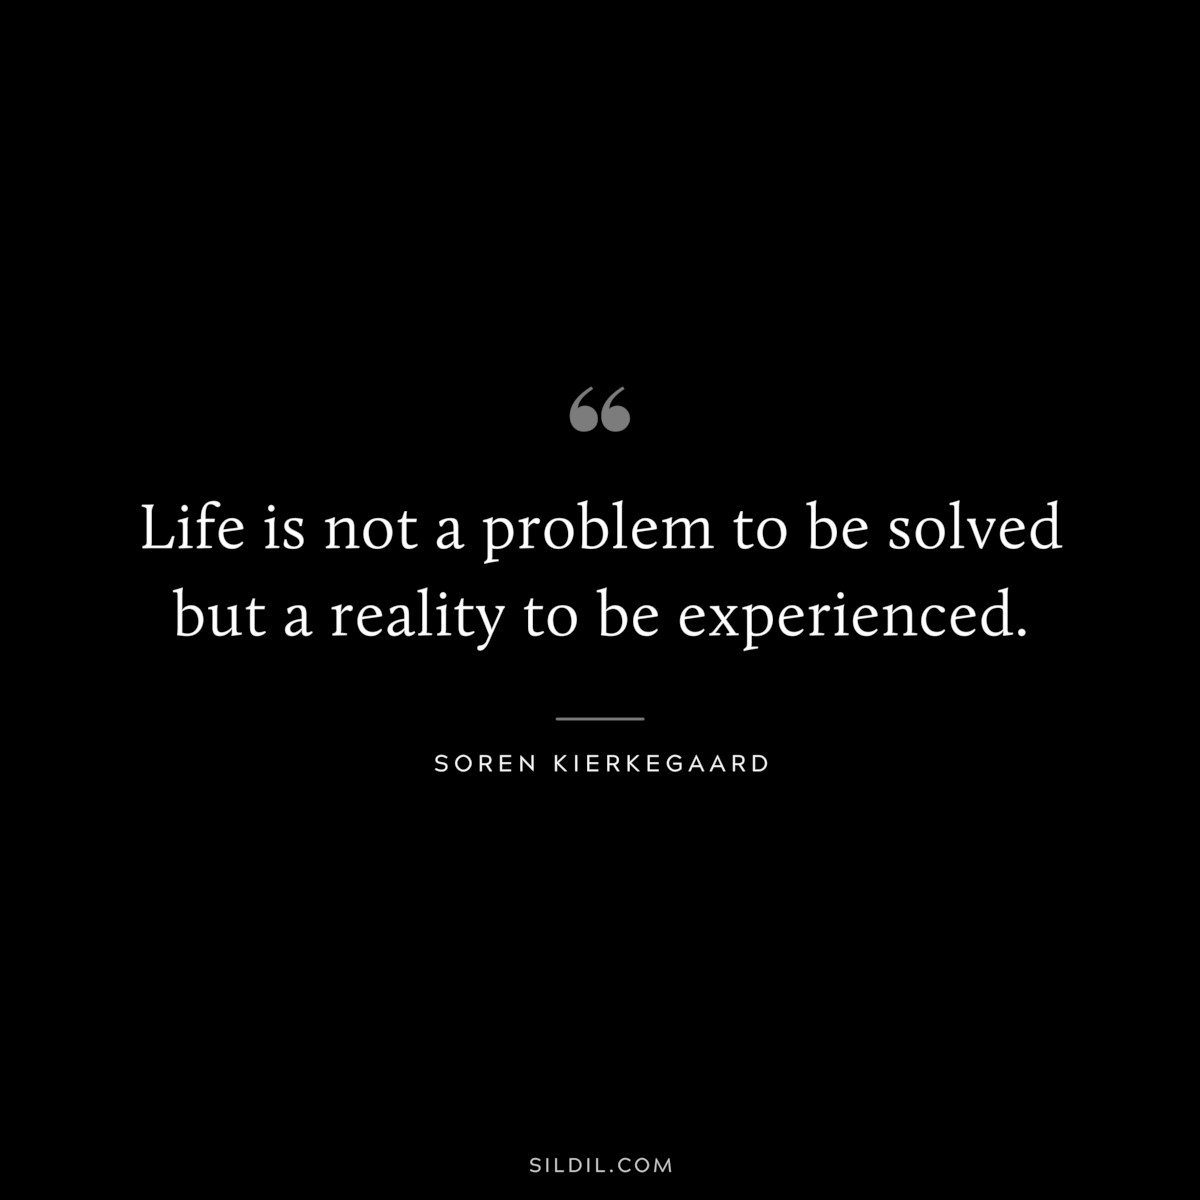 Life is not a problem to be solved but a reality to be experienced. ― Soren Kierkegaard